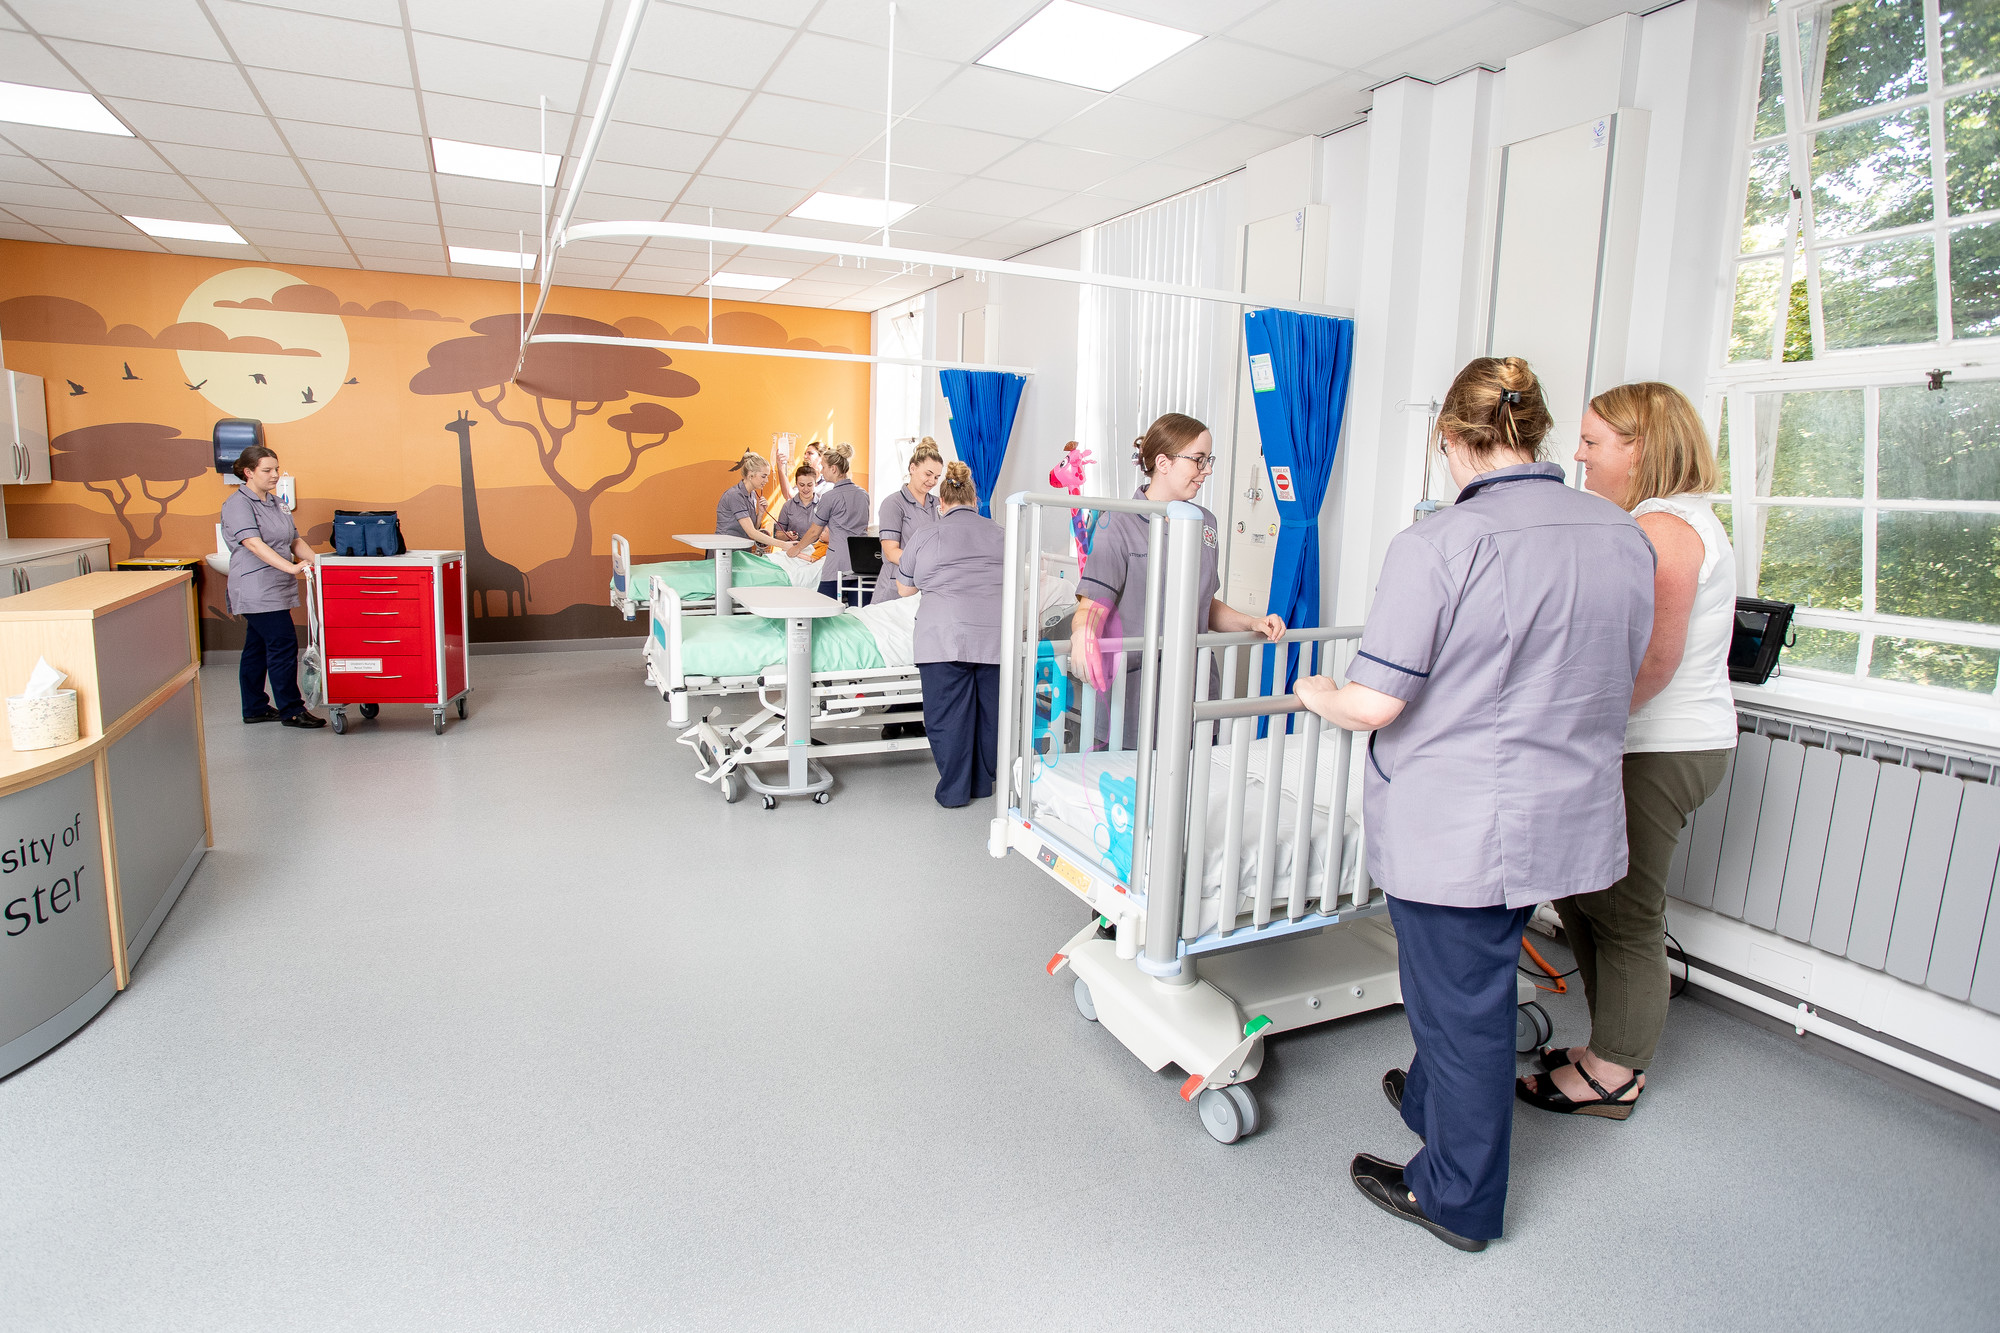 Student midwives in a simulation room